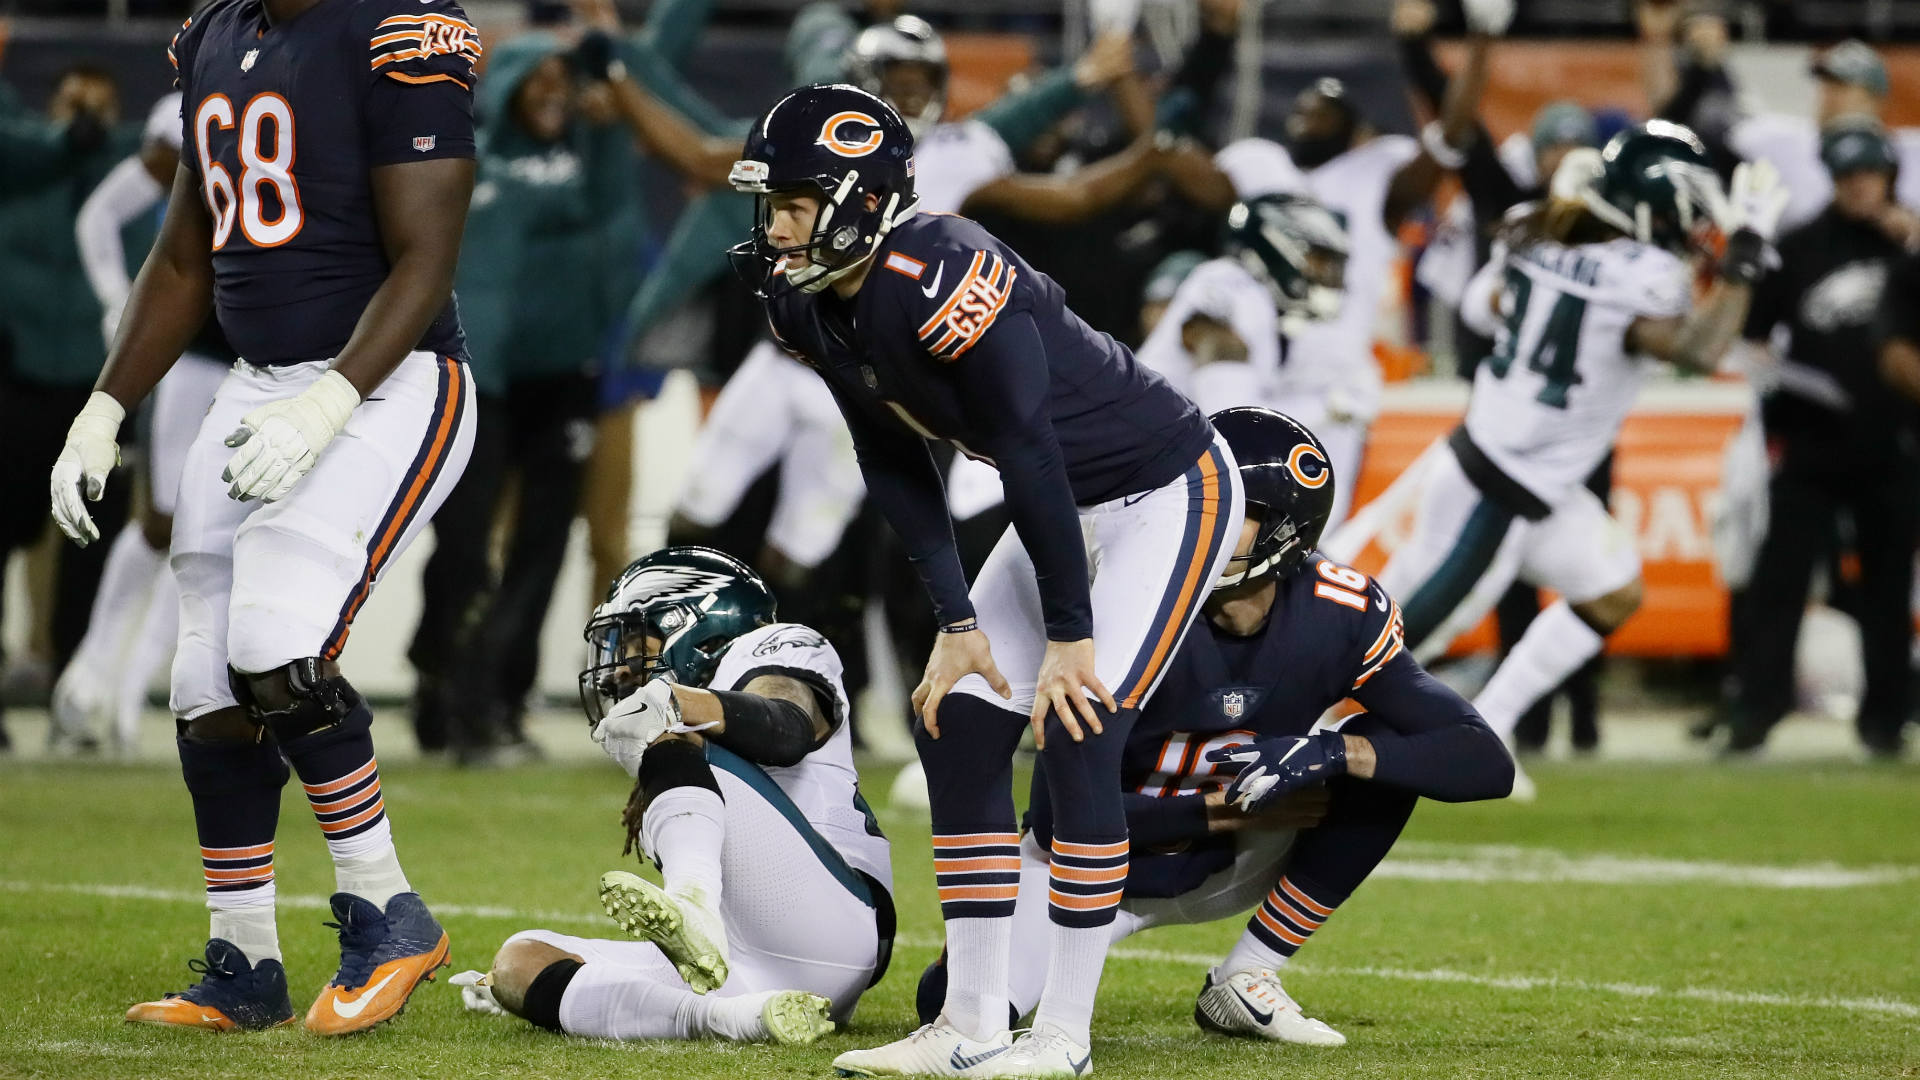 NFL playoffs 2019: Bears players rally around Cody Parkey after missed field goal